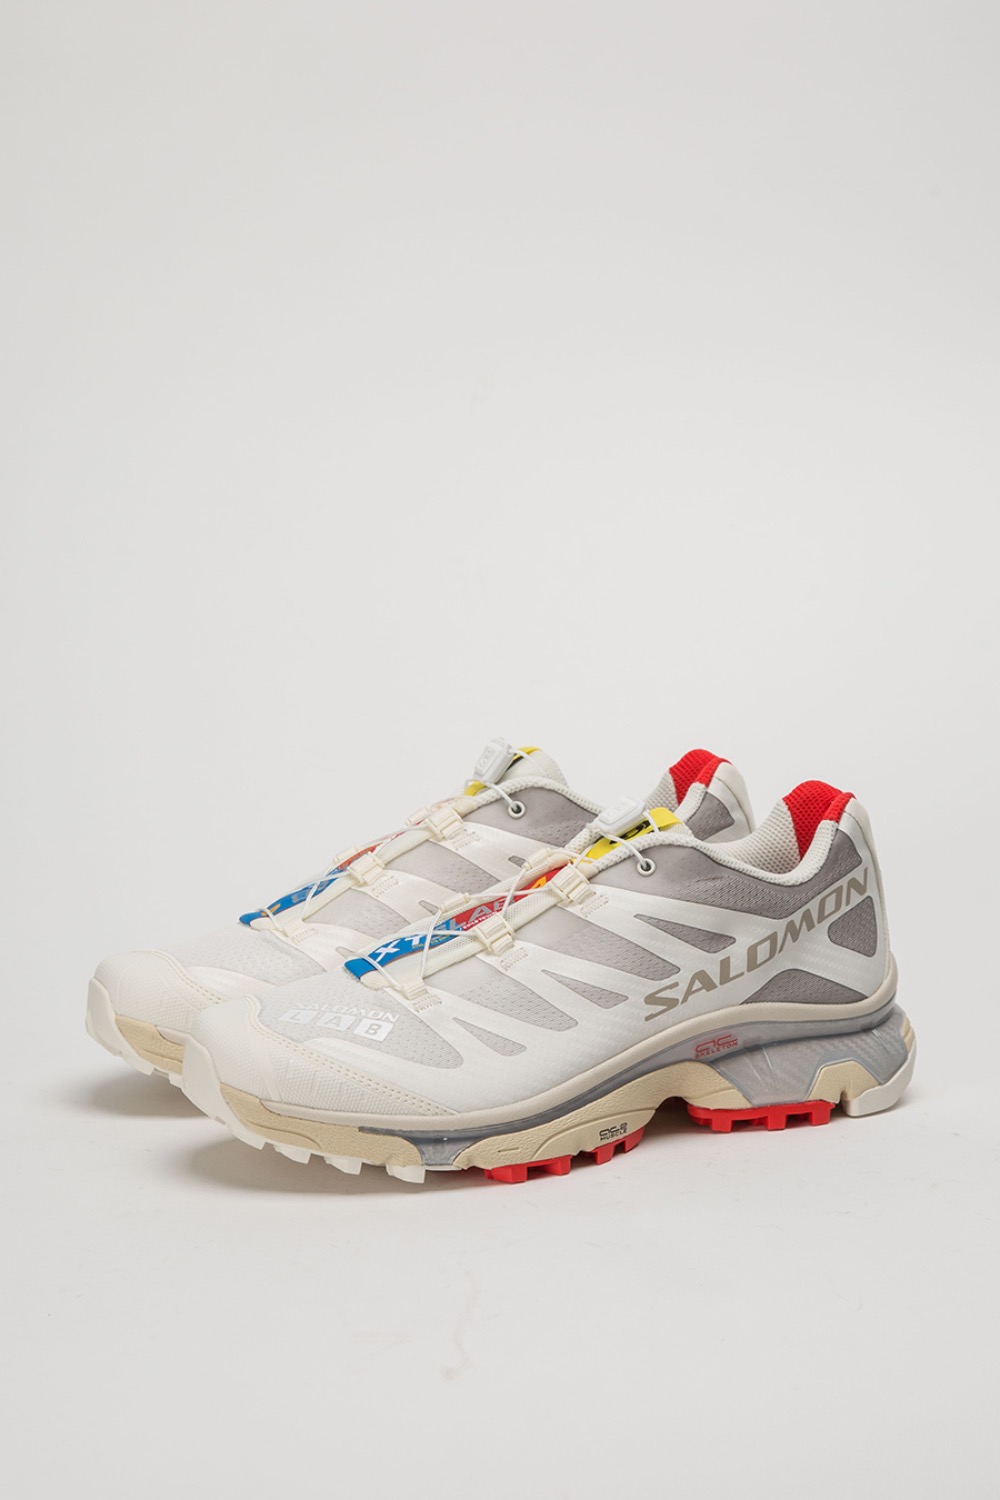 [RESTOCK] SHOES XT-4 OG VANILLA ICE/FIERY RED/WHTE